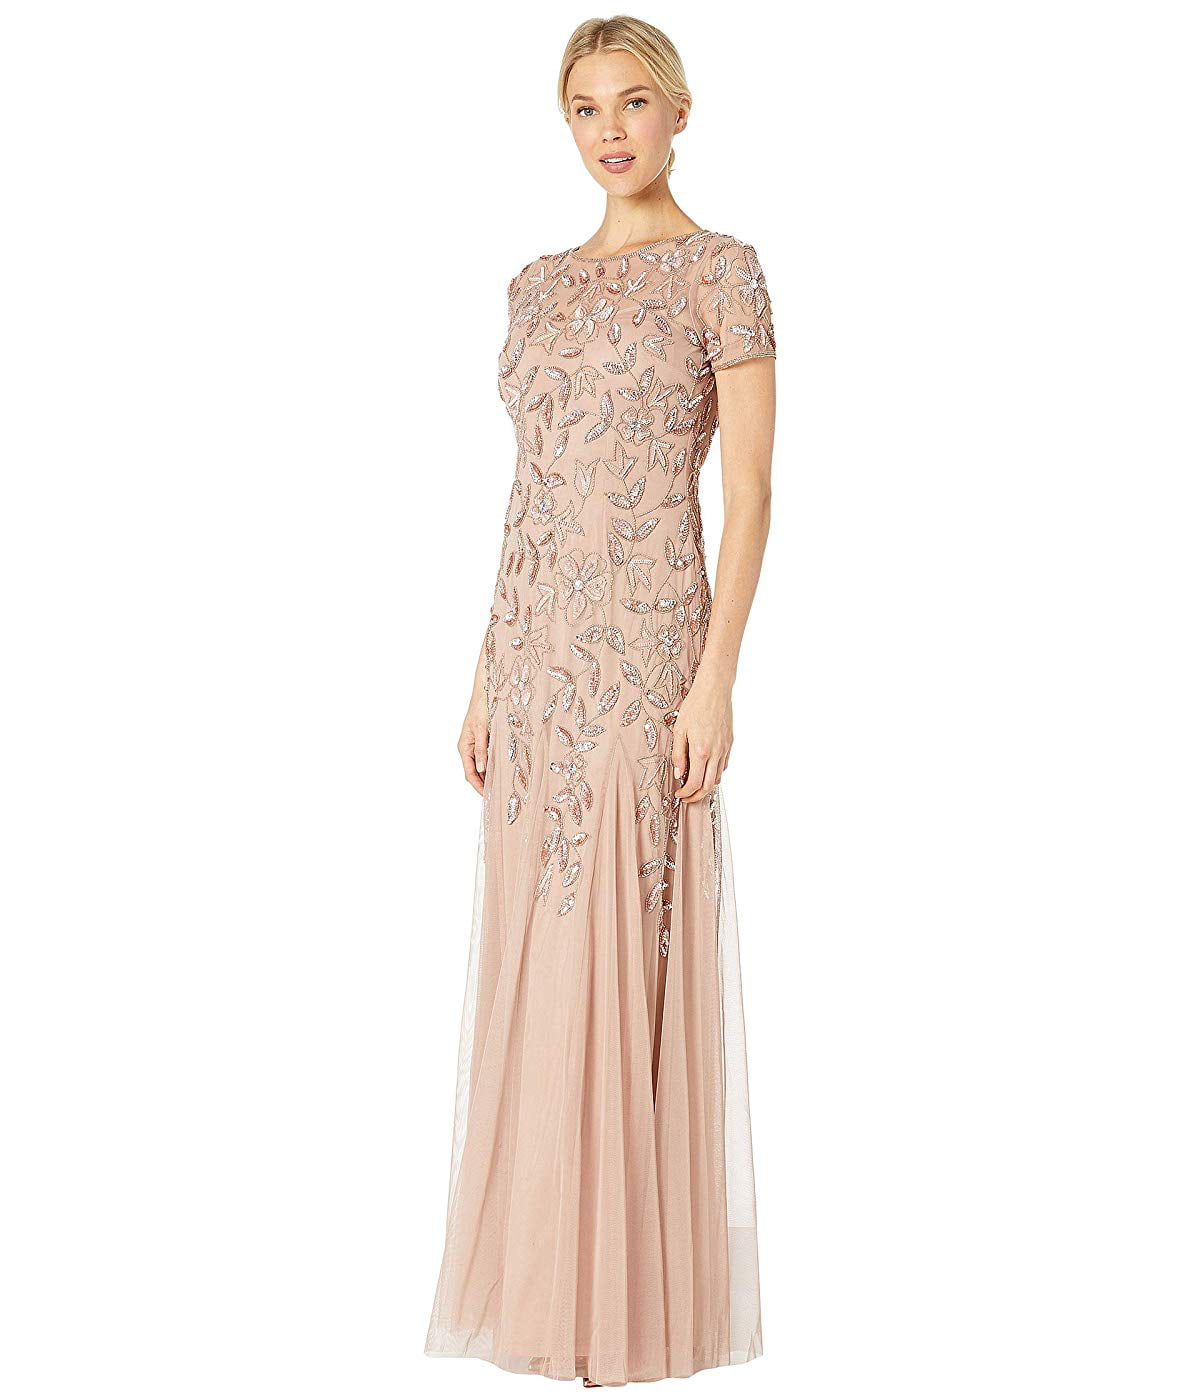 adrianna papell rose gold beaded dress